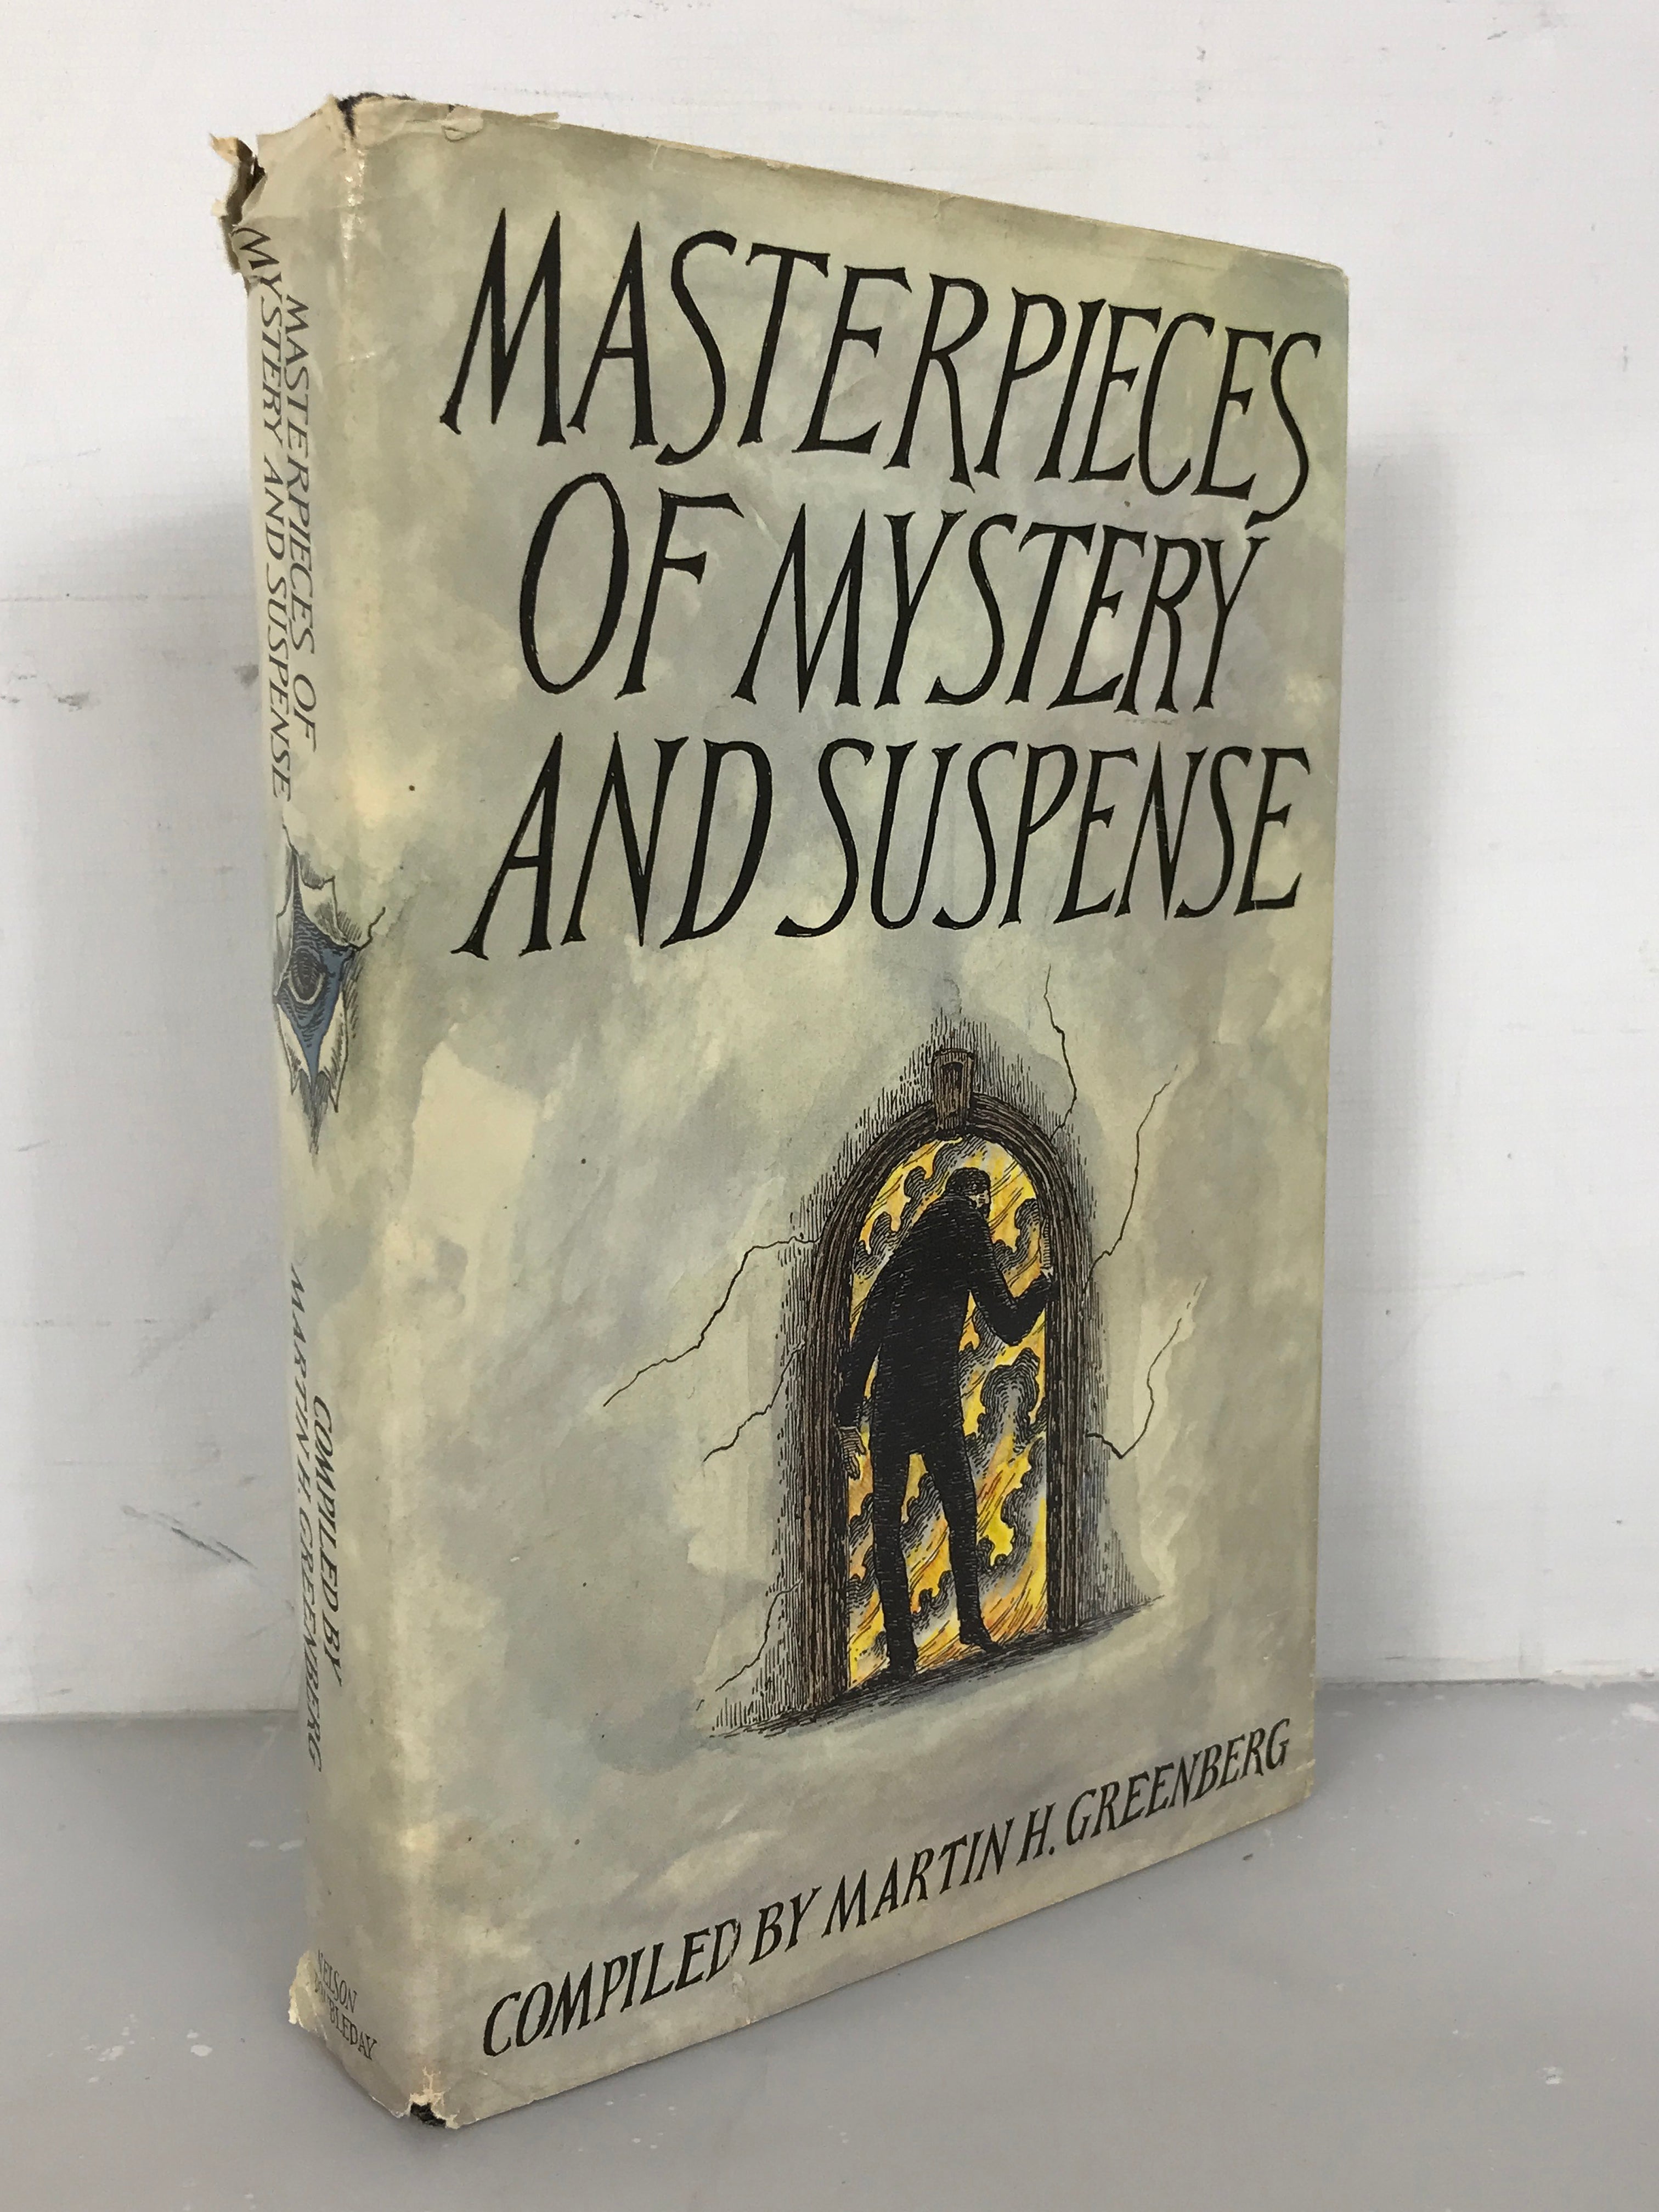 Masterpieces of Mystery and Suspense by Greenburg 1988 HC DJ With Edward Gorey Illustration